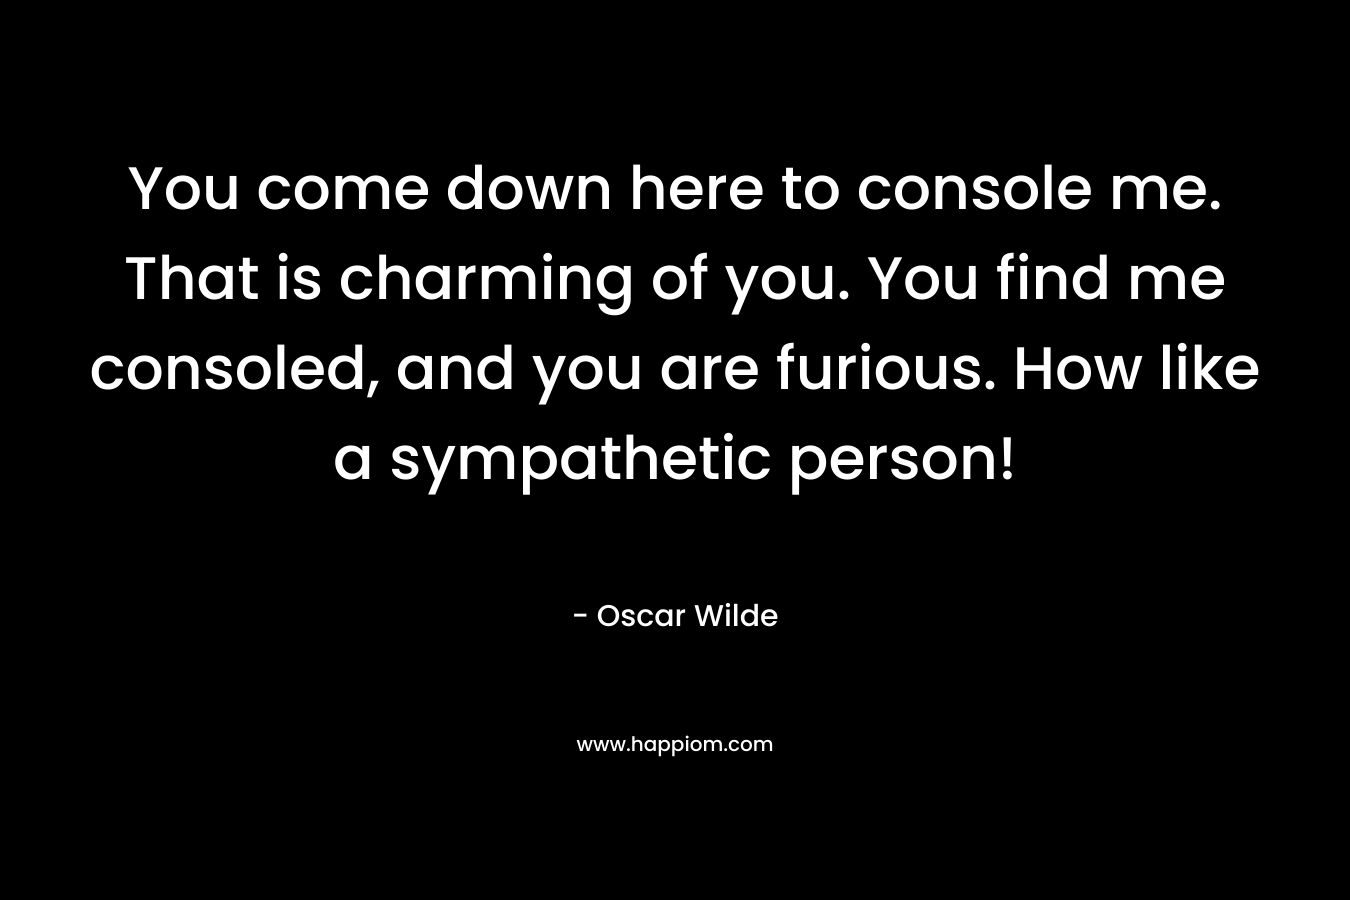 You come down here to console me. That is charming of you. You find me consoled, and you are furious. How like a sympathetic person! – Oscar Wilde